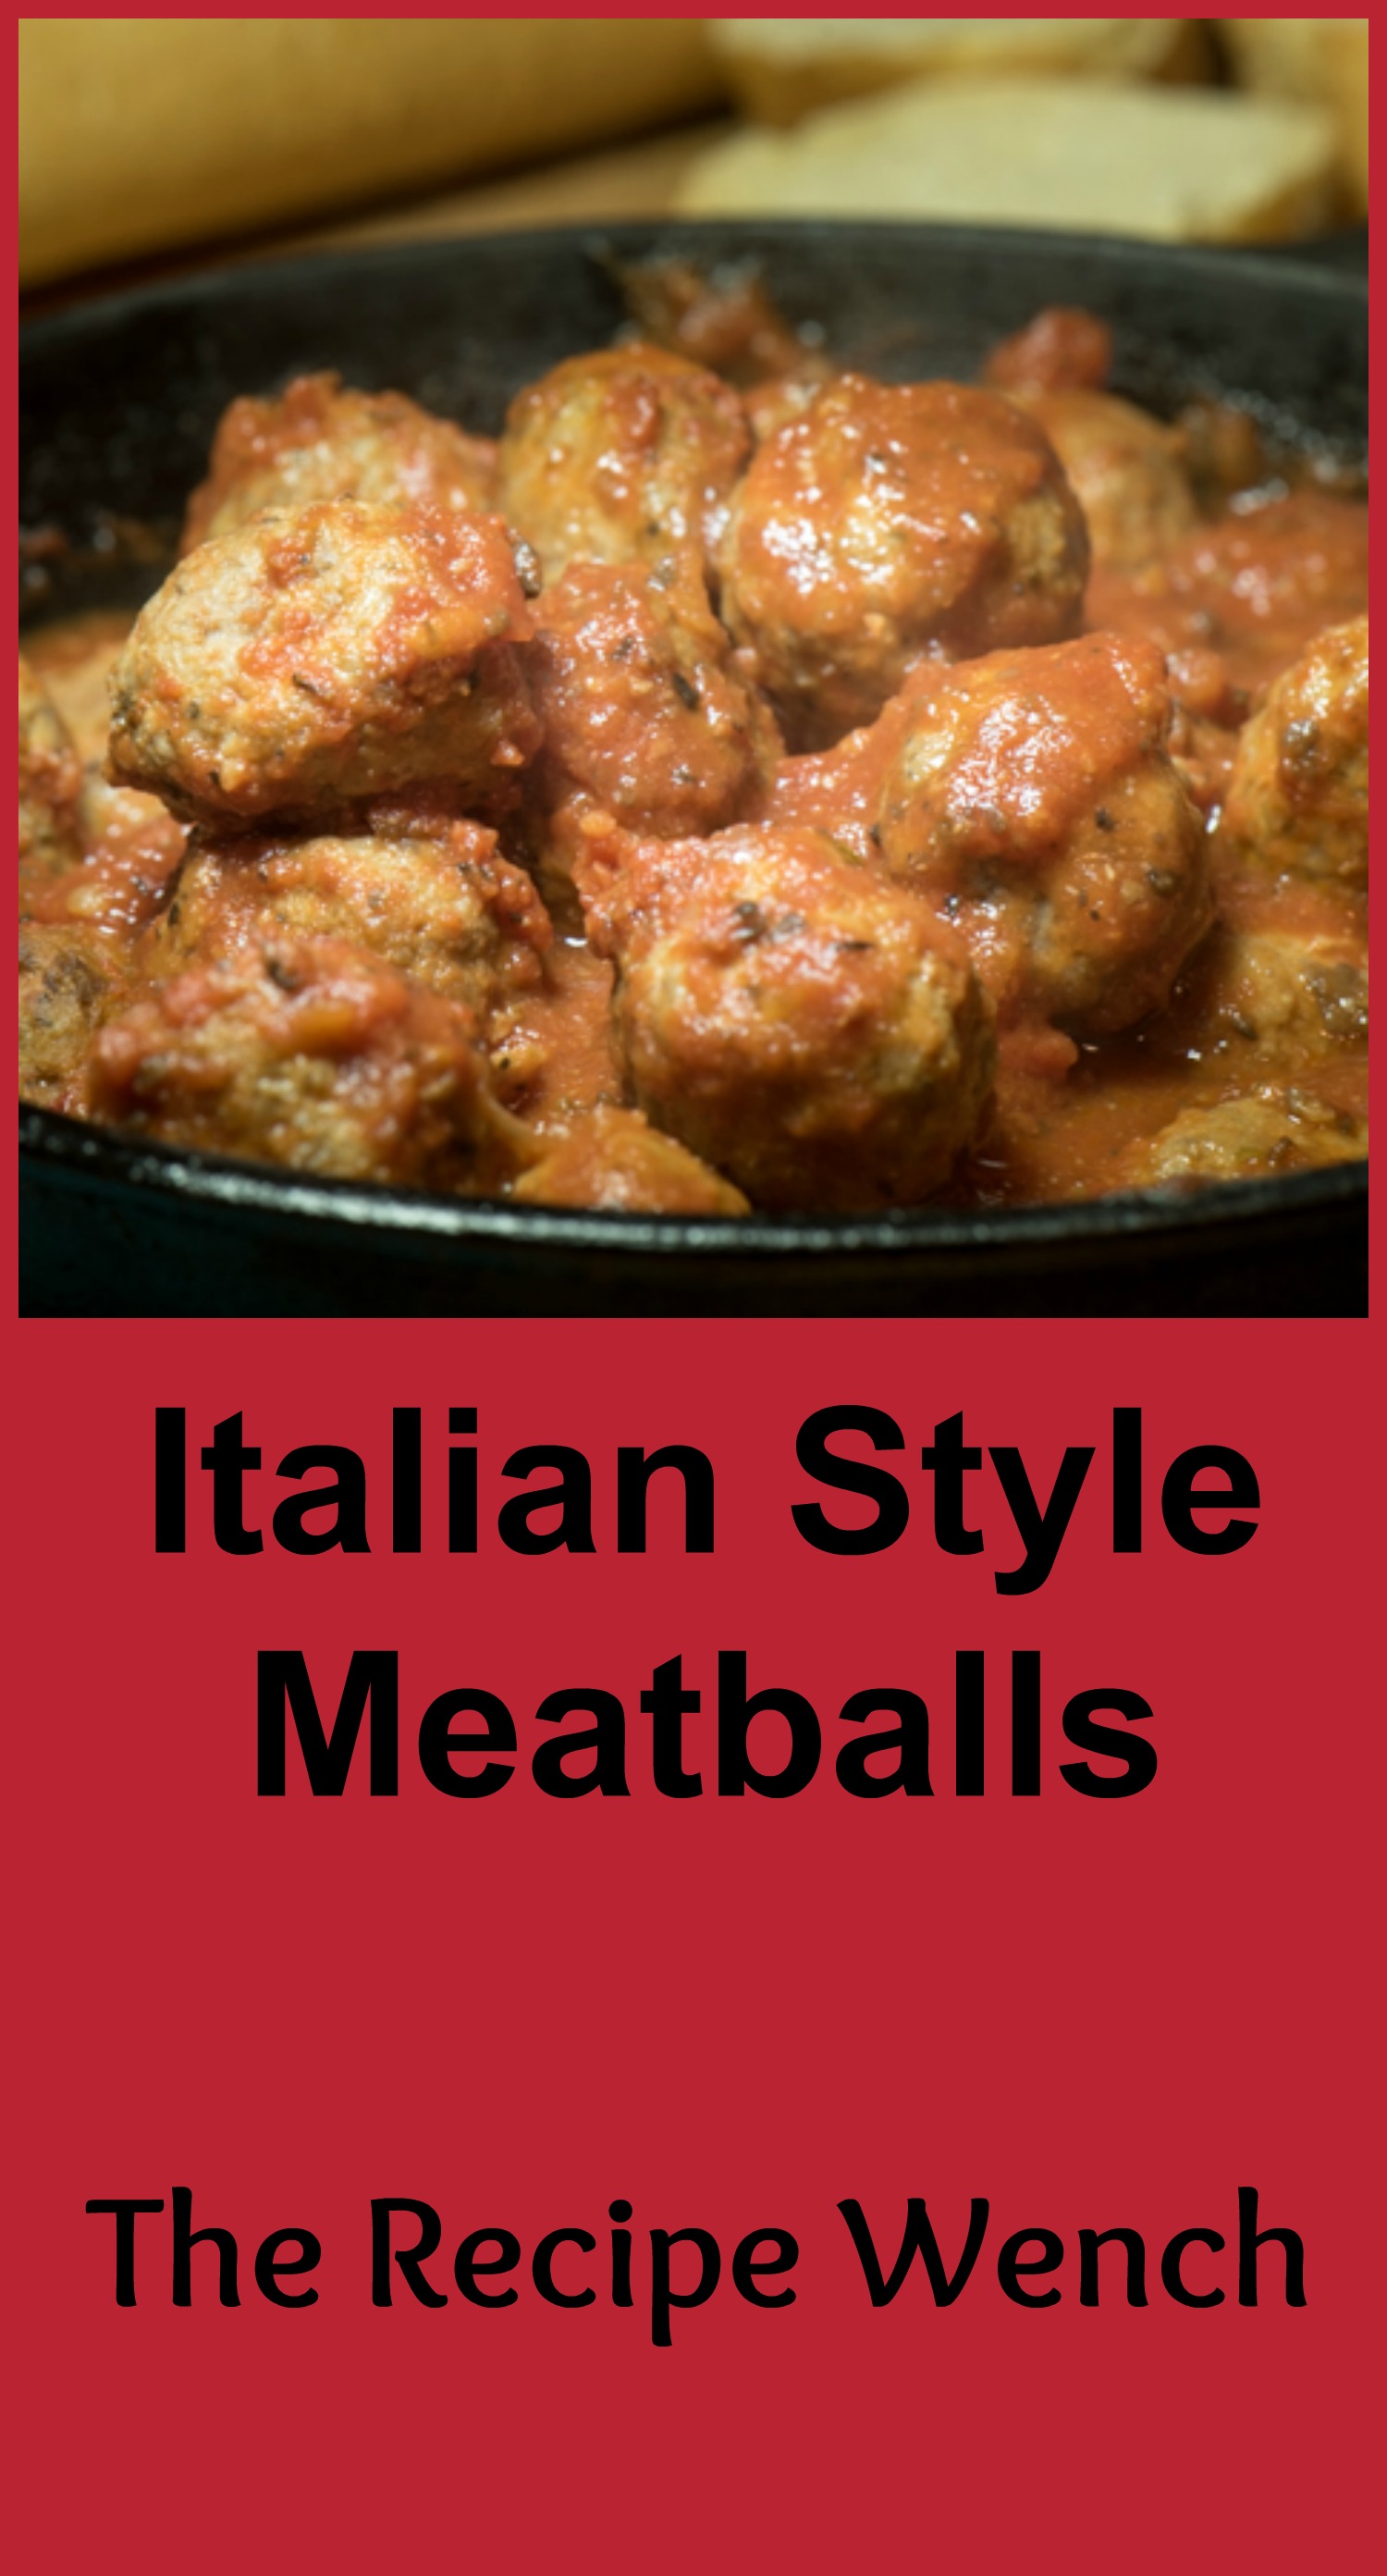 Italian style meatballs - super easy and versatile. Make smaller to serve as appetizers or larger to go into sauce or on a chewy Italian roll with lots of melted mozzarella! | The Recipe Wench